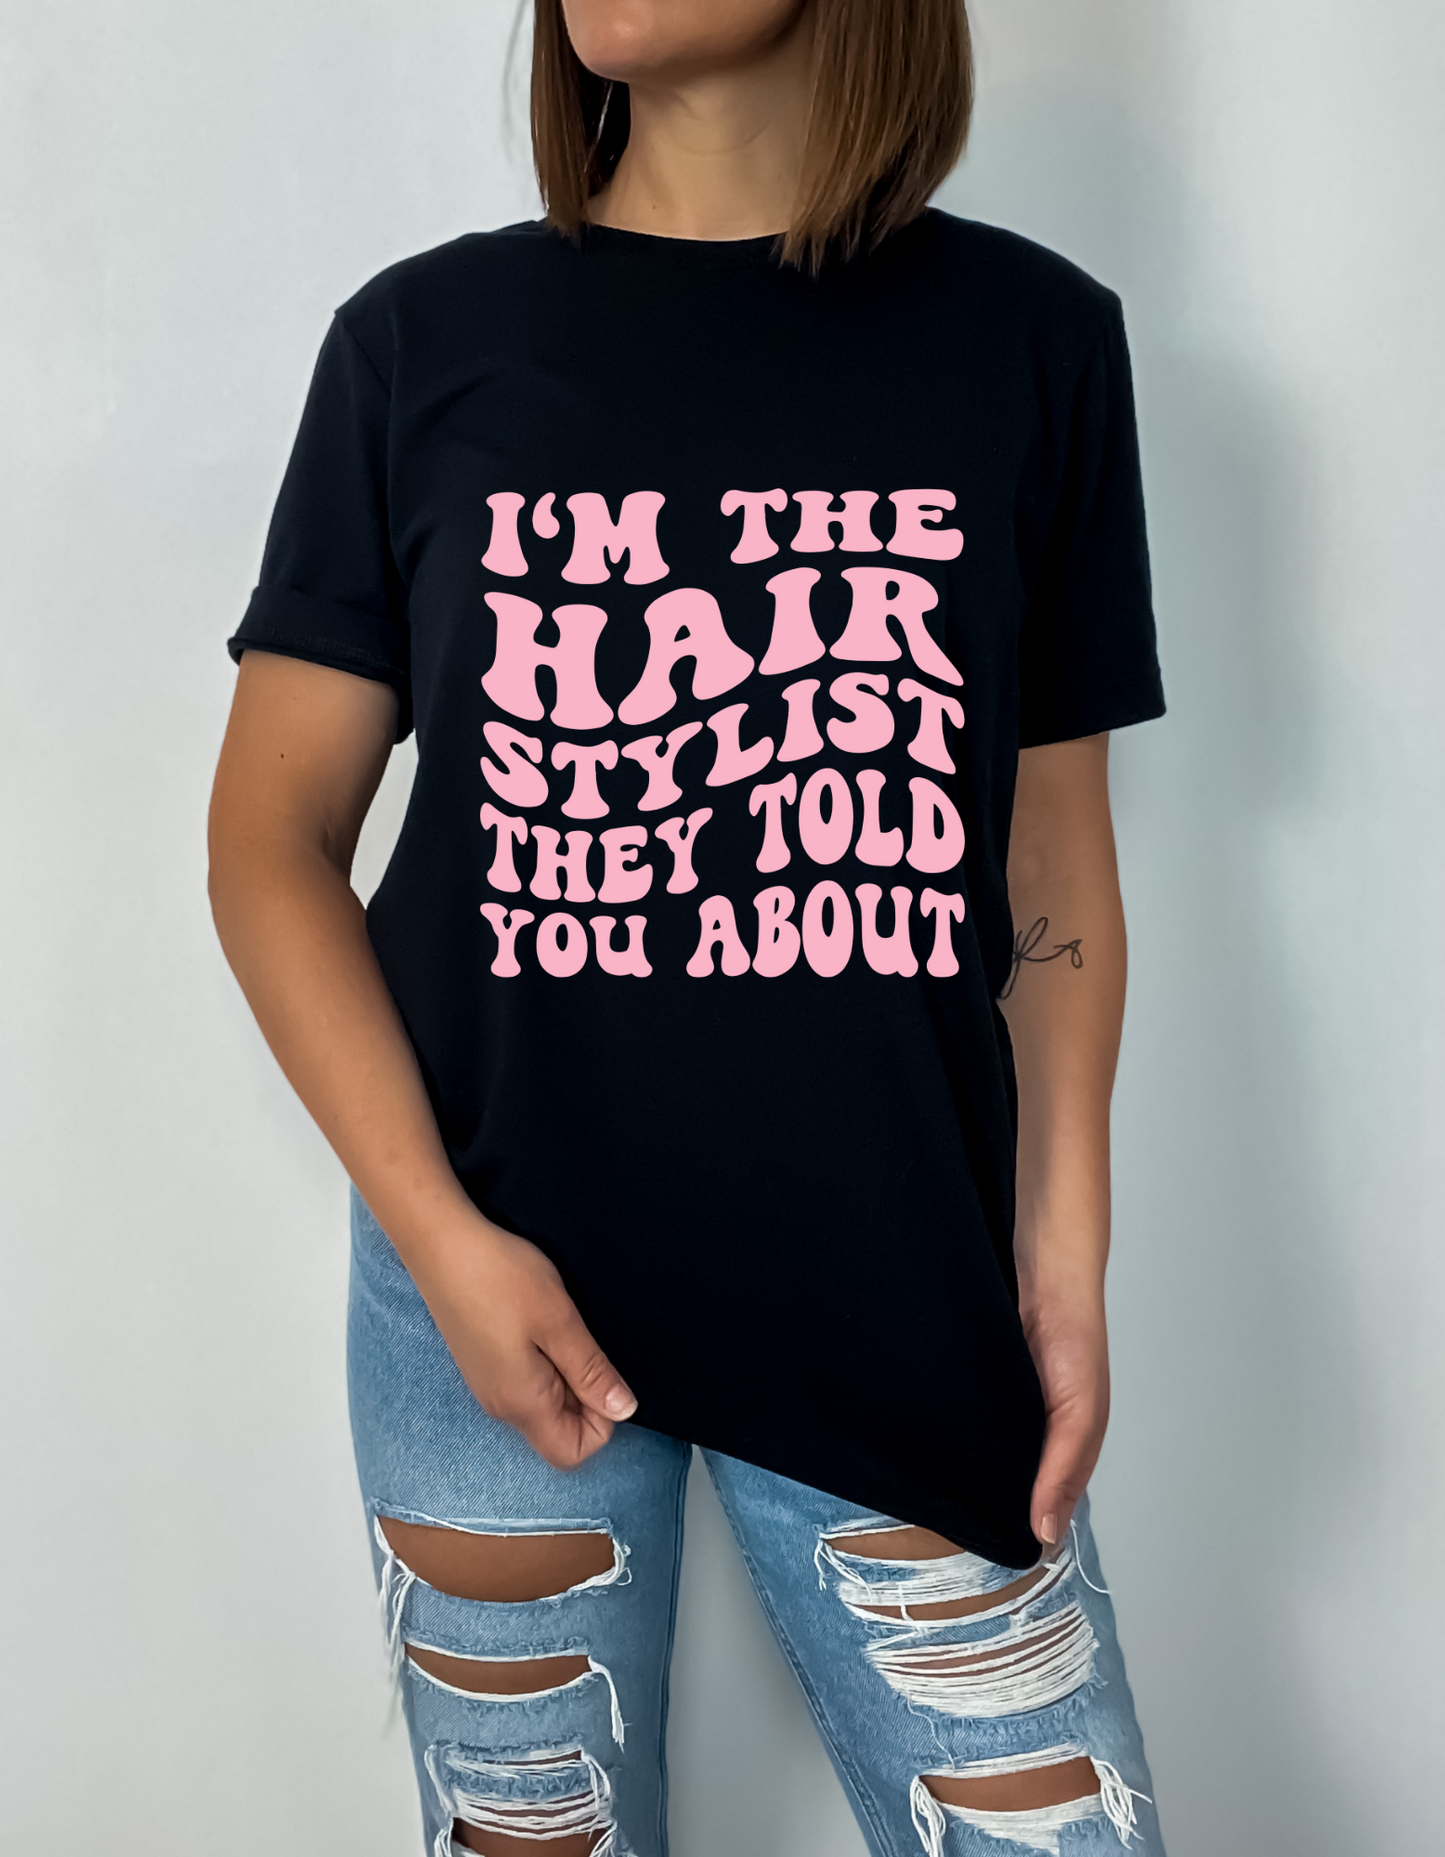 I'm the hairstylist they told you about T-shirt